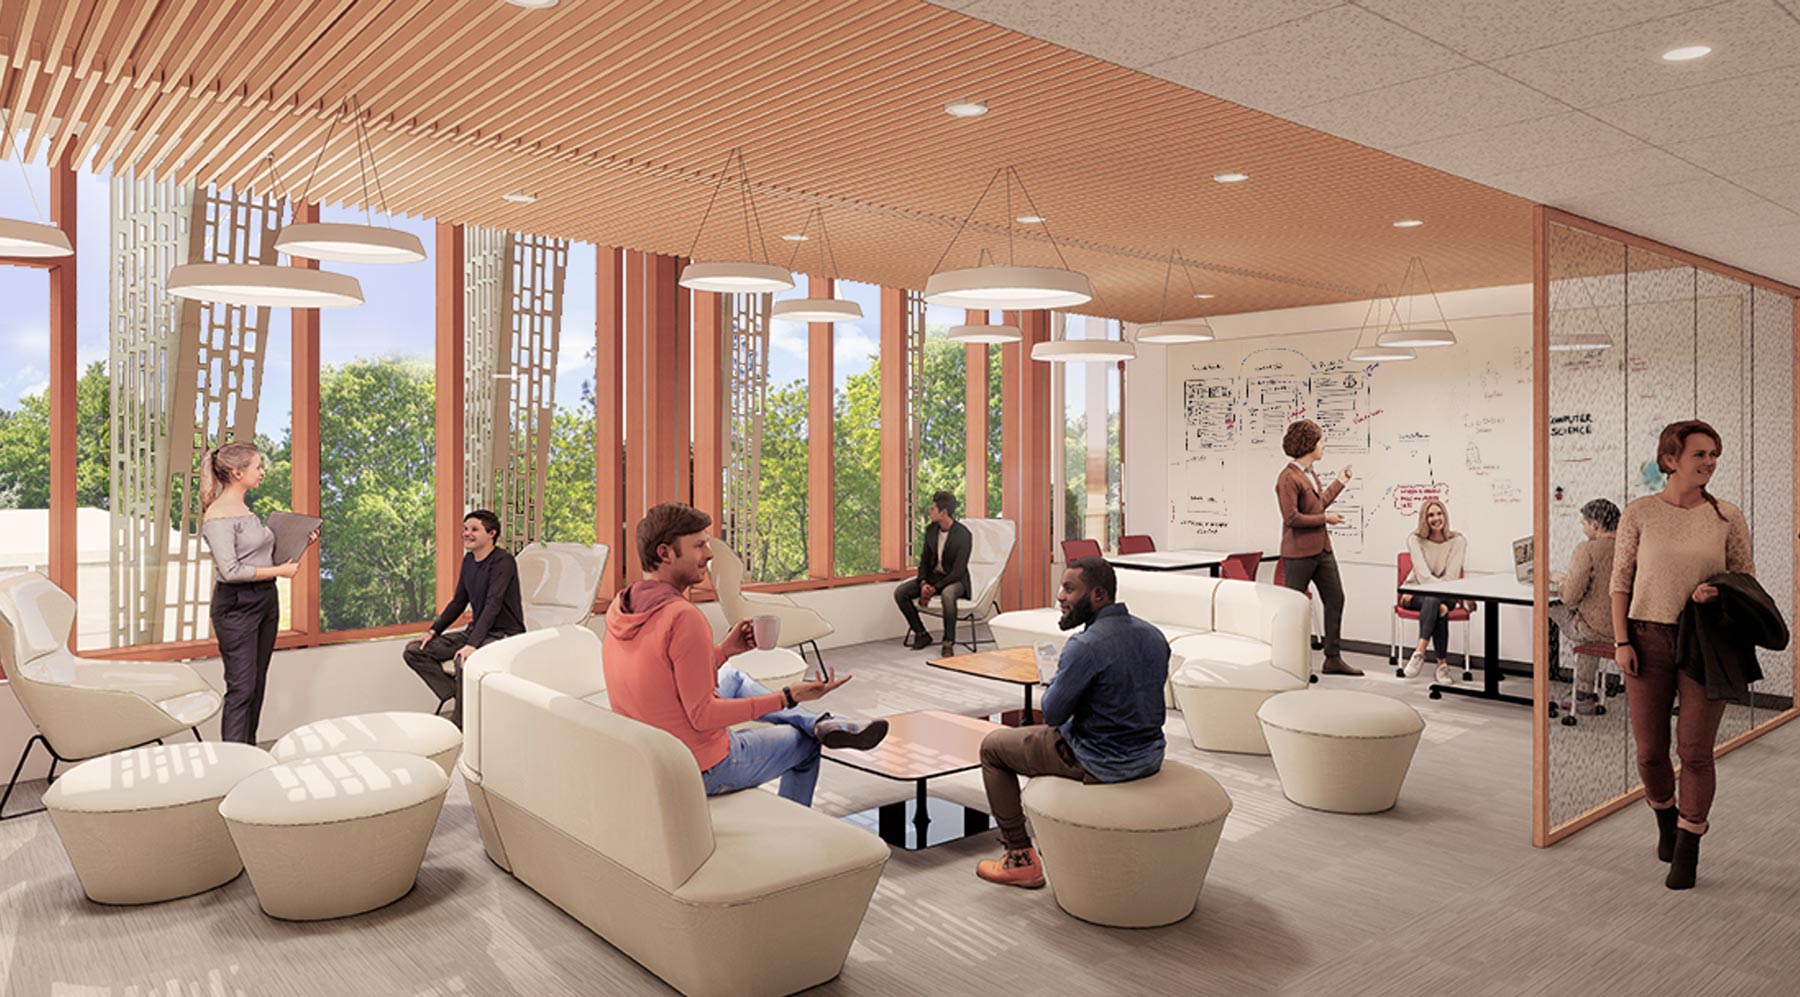 department-specific “living rooms” will provide both students and faculty informal  space to study, connect, and socialize